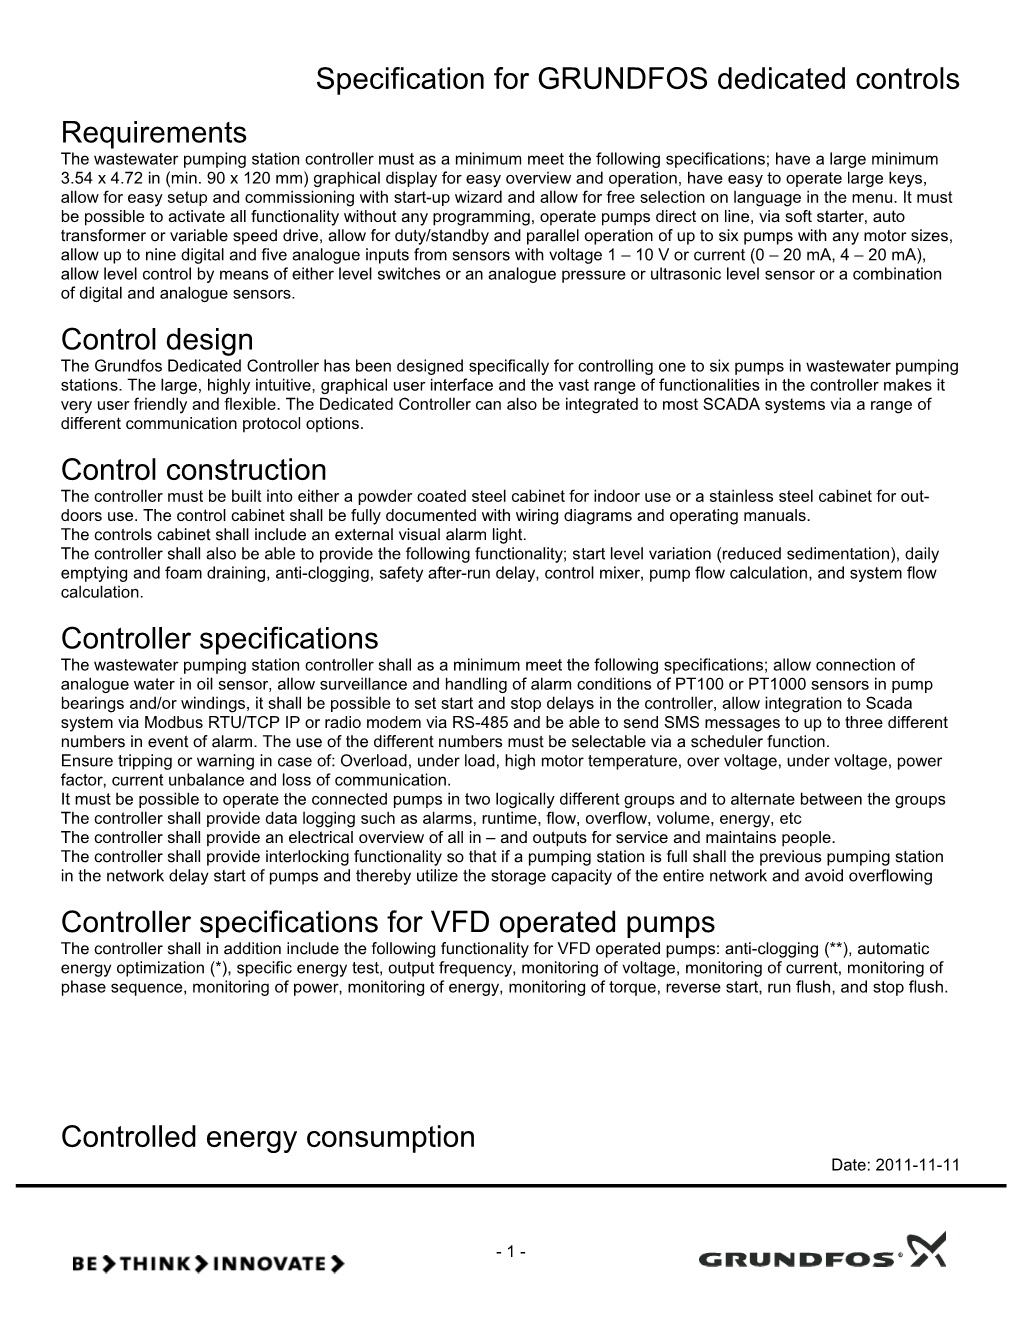 Specification for GRUNDFOS Dedicated Controls